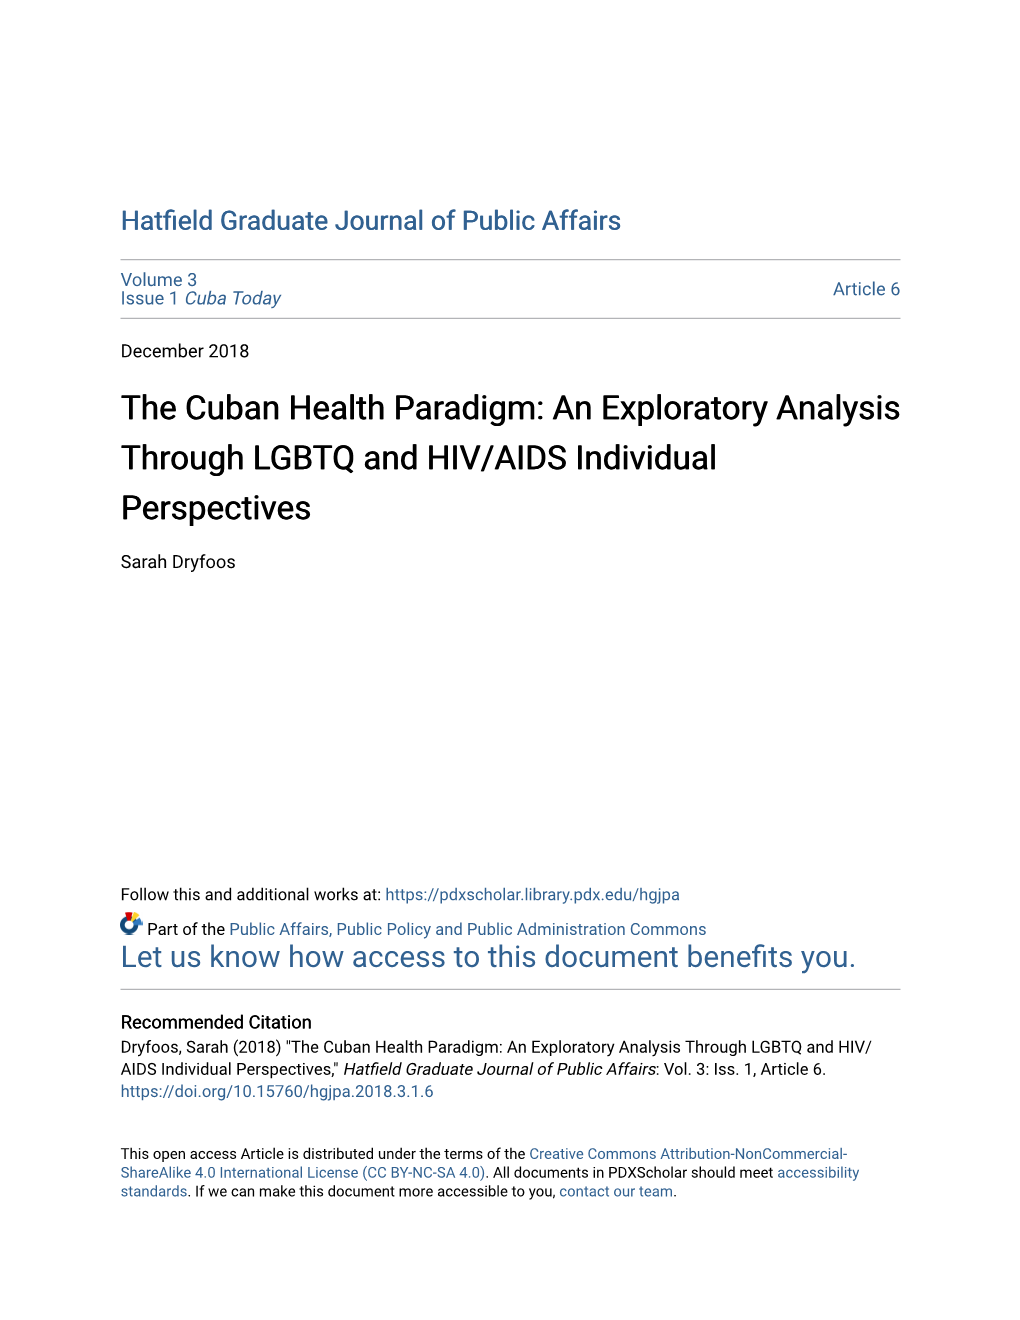 The Cuban Health Paradigm: an Exploratory Analysis Through LGBTQ and HIV/AIDS Individual Perspectives